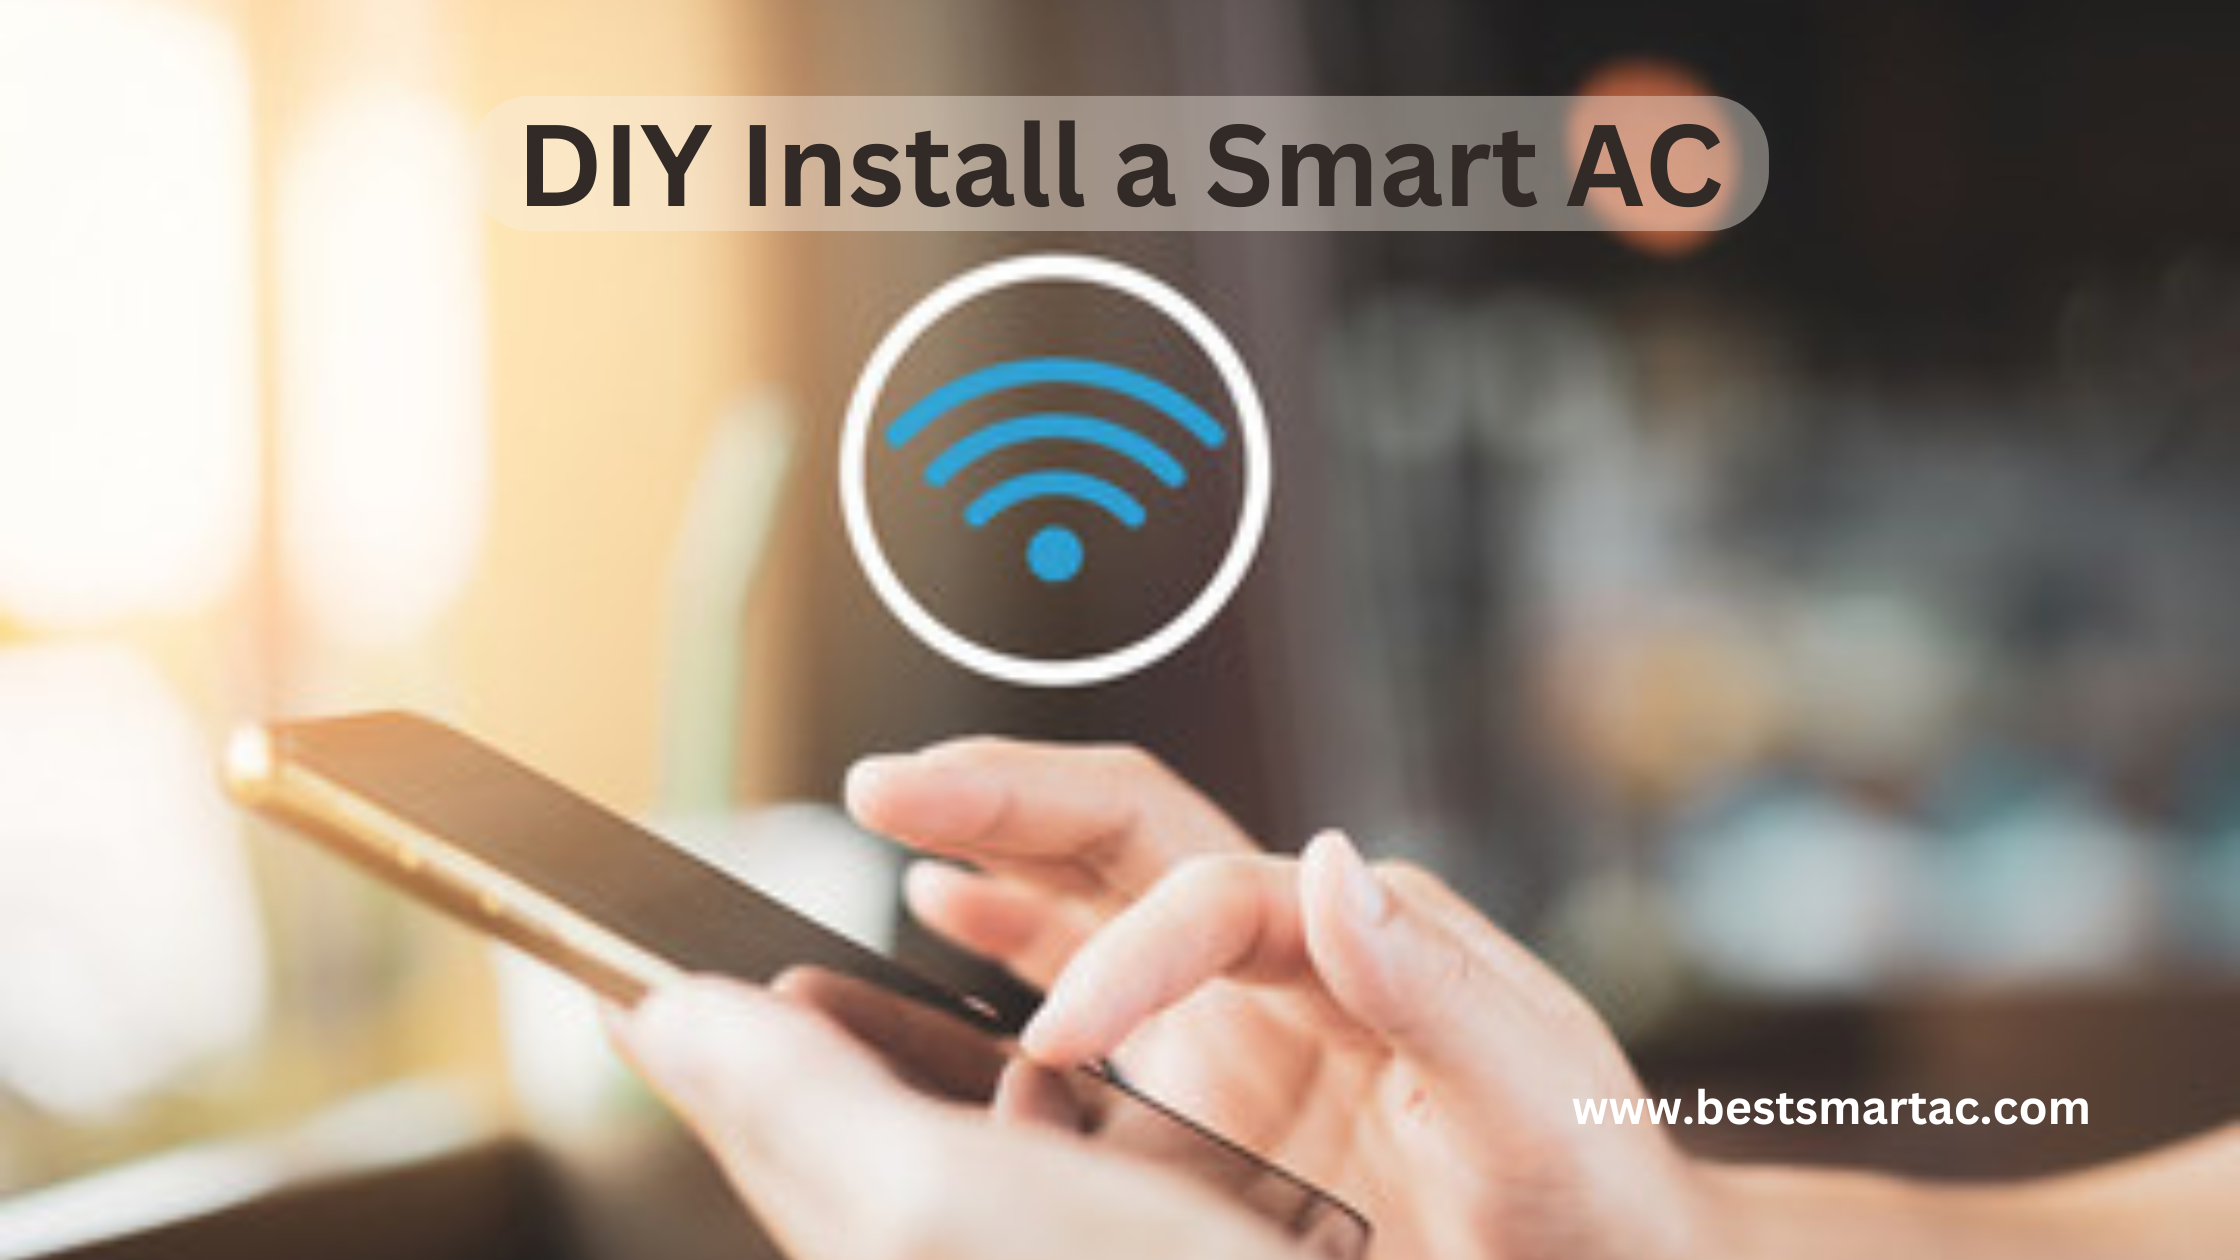 A person installing a smart air conditioning unit in a room, using a screwdriver and following installation instructions. The smart AC is connected to a smartphone via an app, showcasing its modern features and convenience.